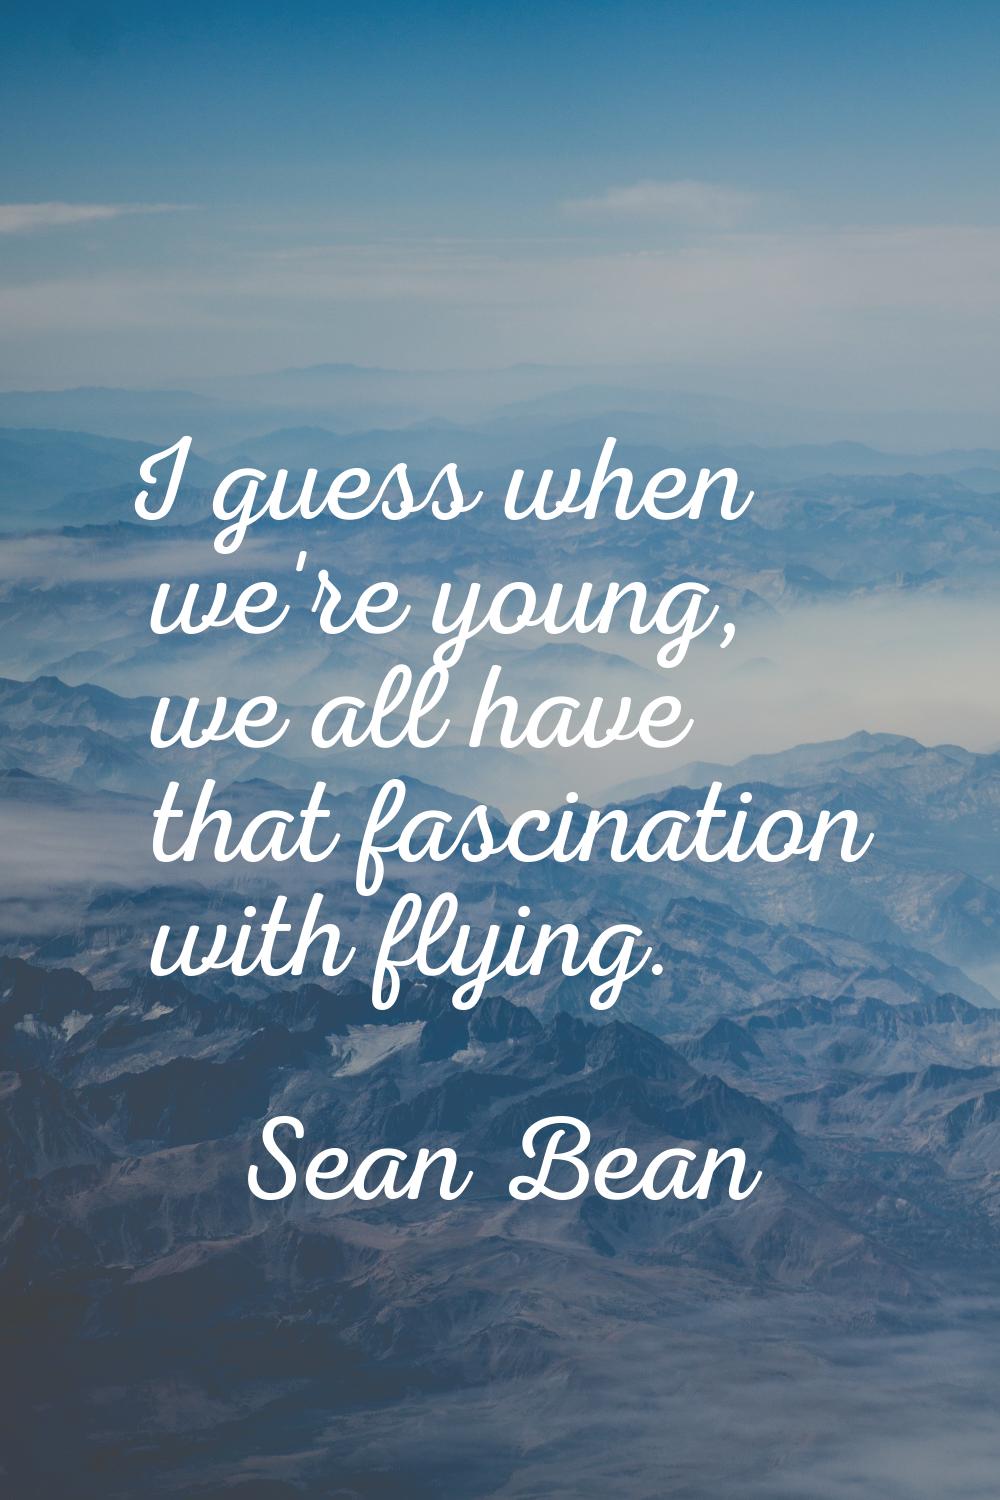 I guess when we're young, we all have that fascination with flying.